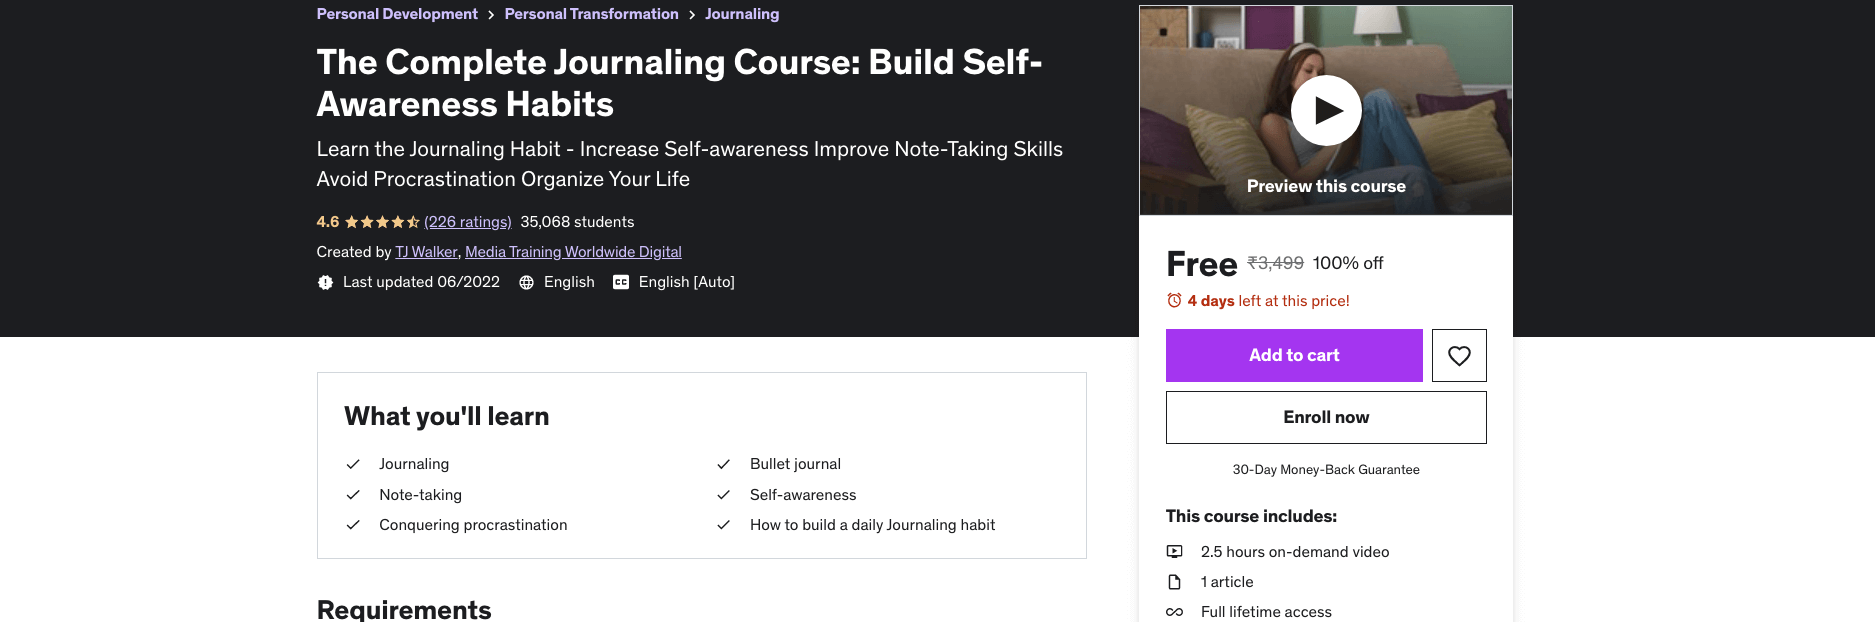 The Complete Journaling Course: Build Self-Awareness Habits